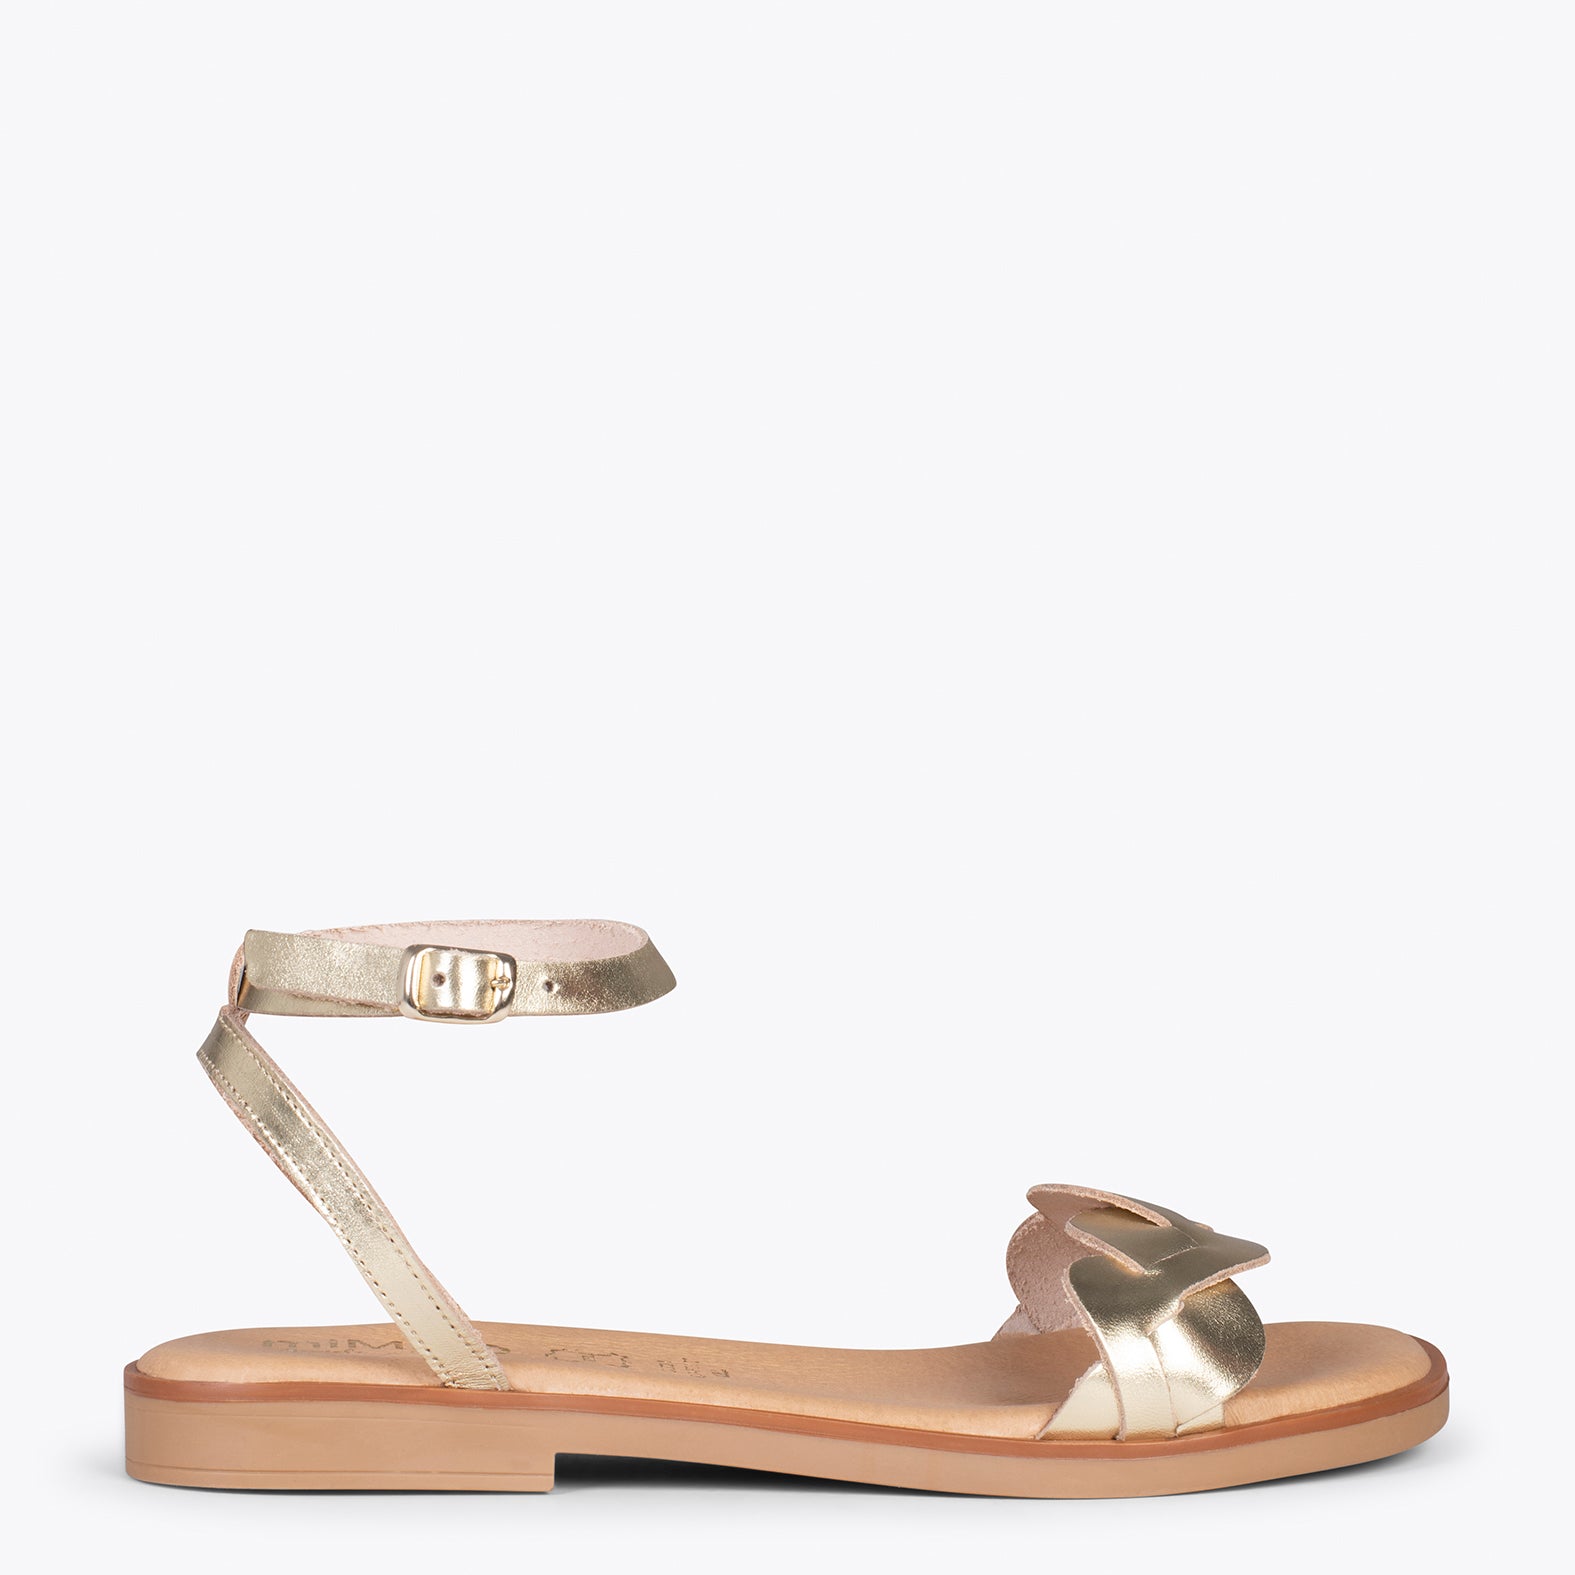 ARECA – GOLD flat sandal with braided upper